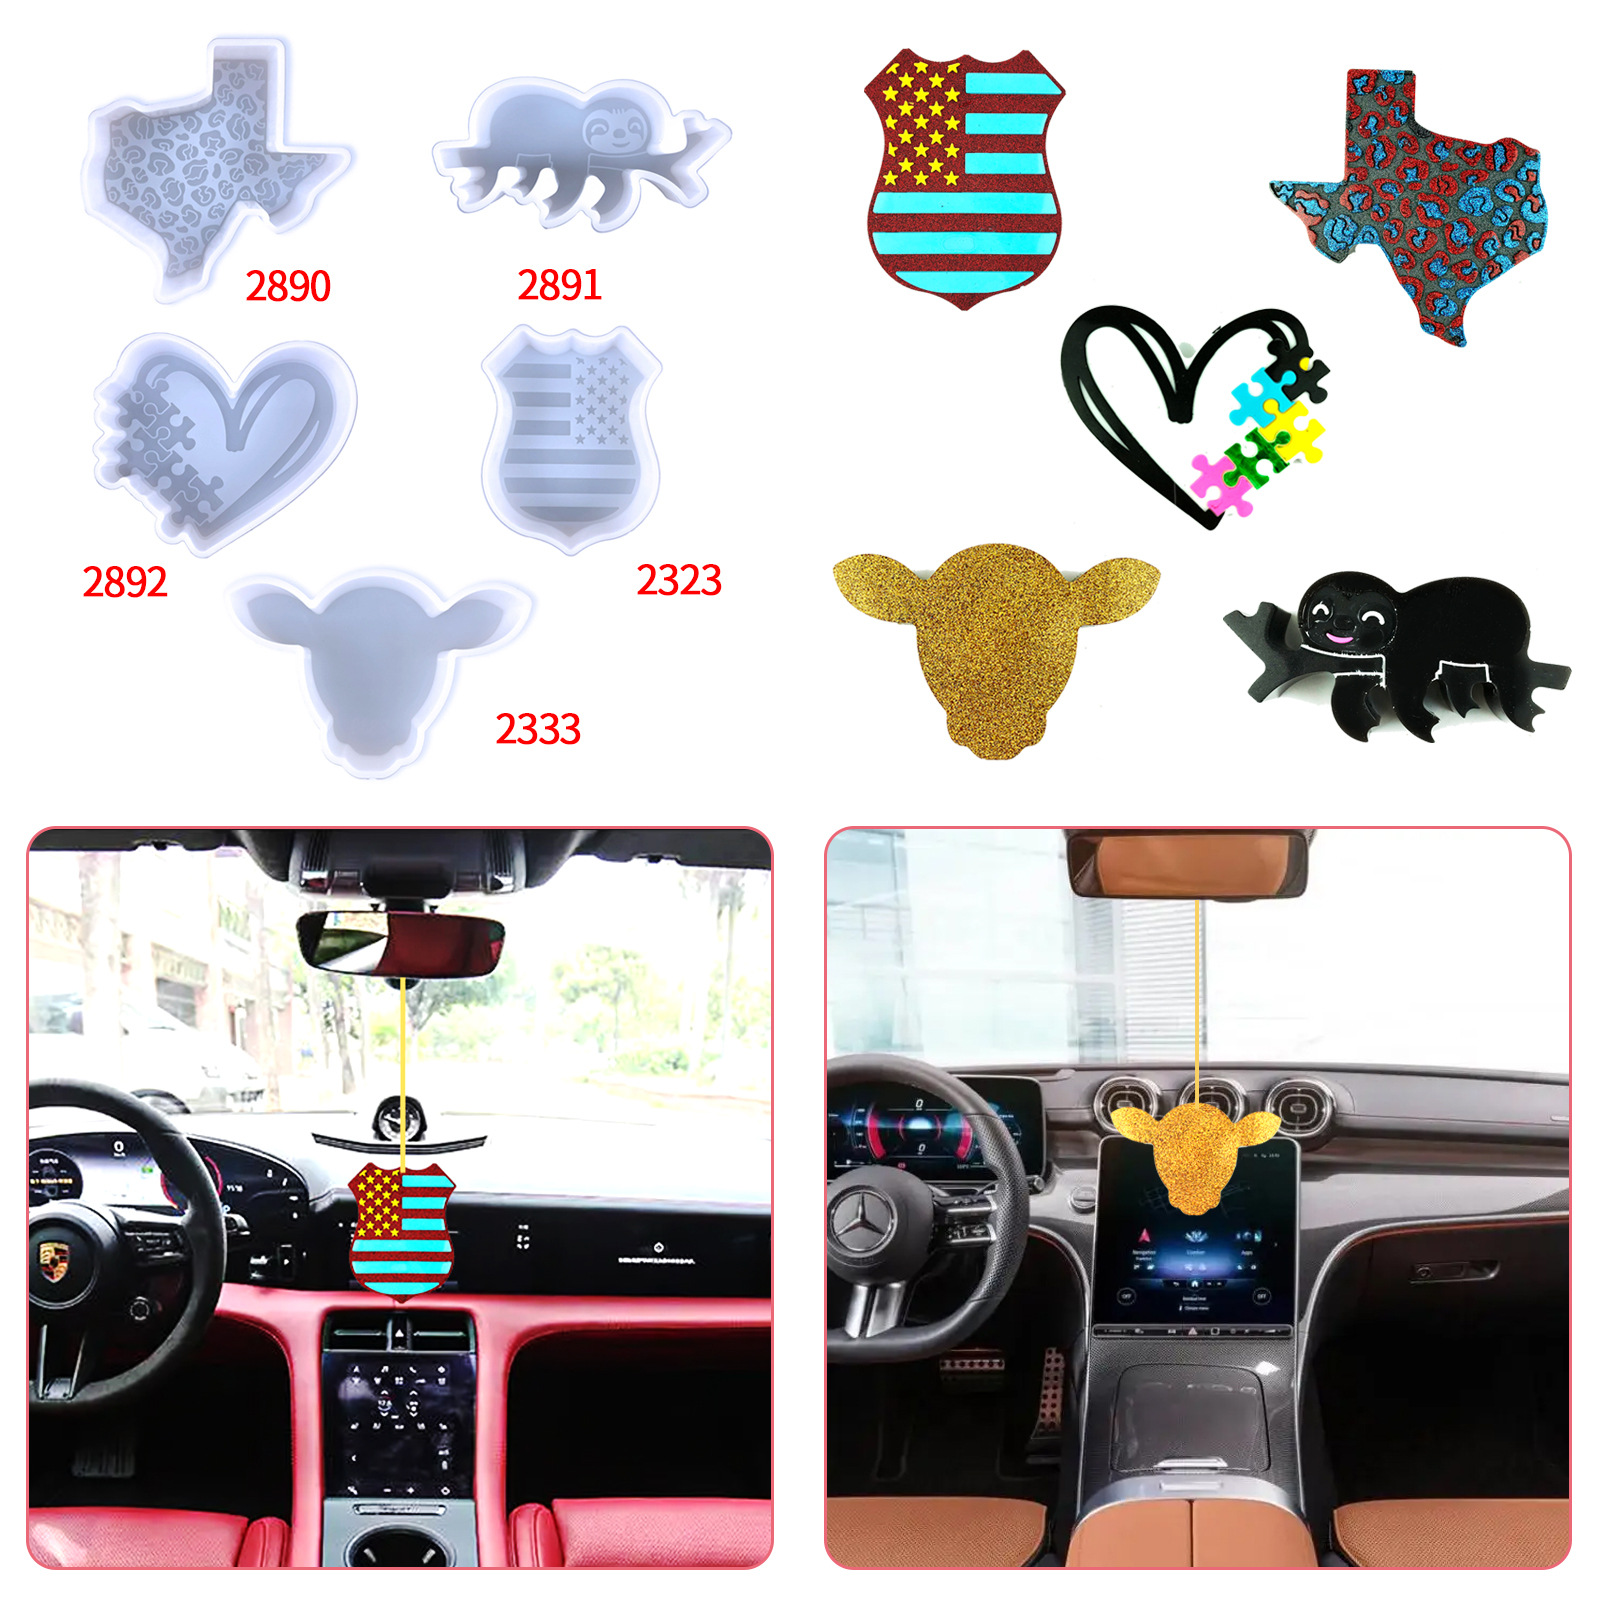 Amazon Hot Sale Fashion Style Car freshie Molds, Police Badge with American Flag Sloth Heart Cow Head Silicone Molds for Freshie, Soap, Resin, Candles Making (5 Shapes)